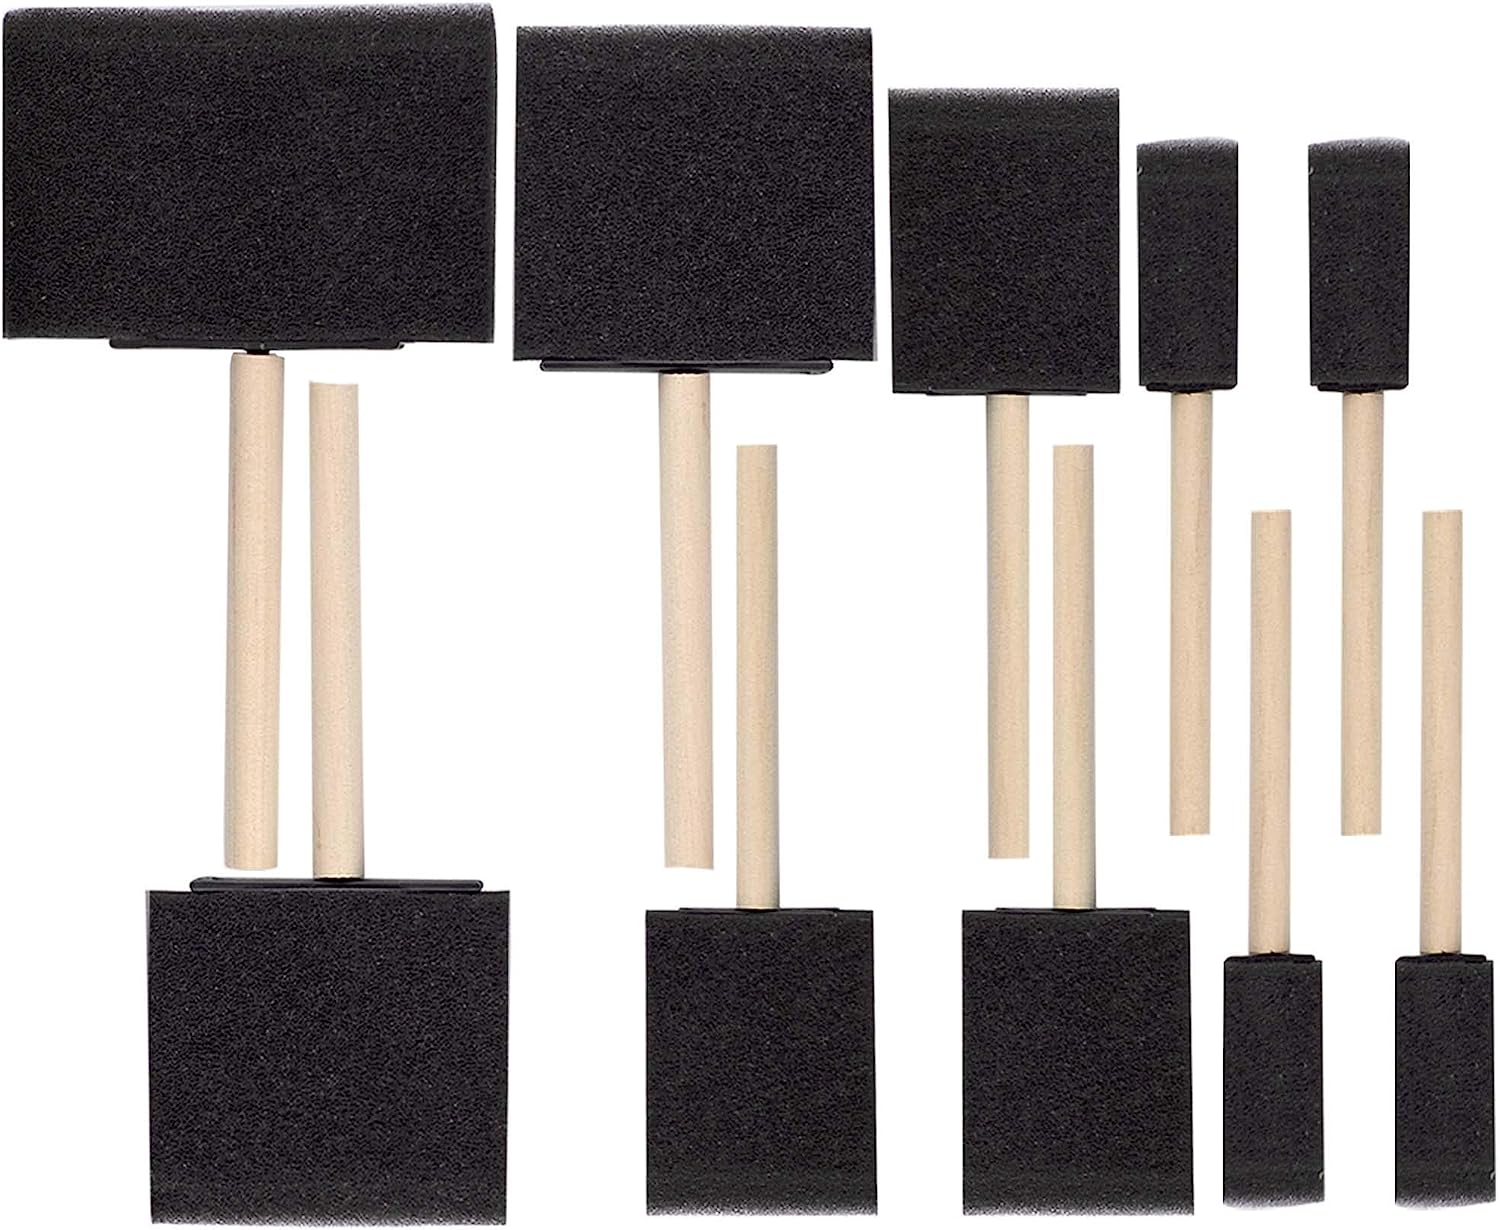 SteadMax 10 Foam Paint Brush Set with Durable Wood [...]